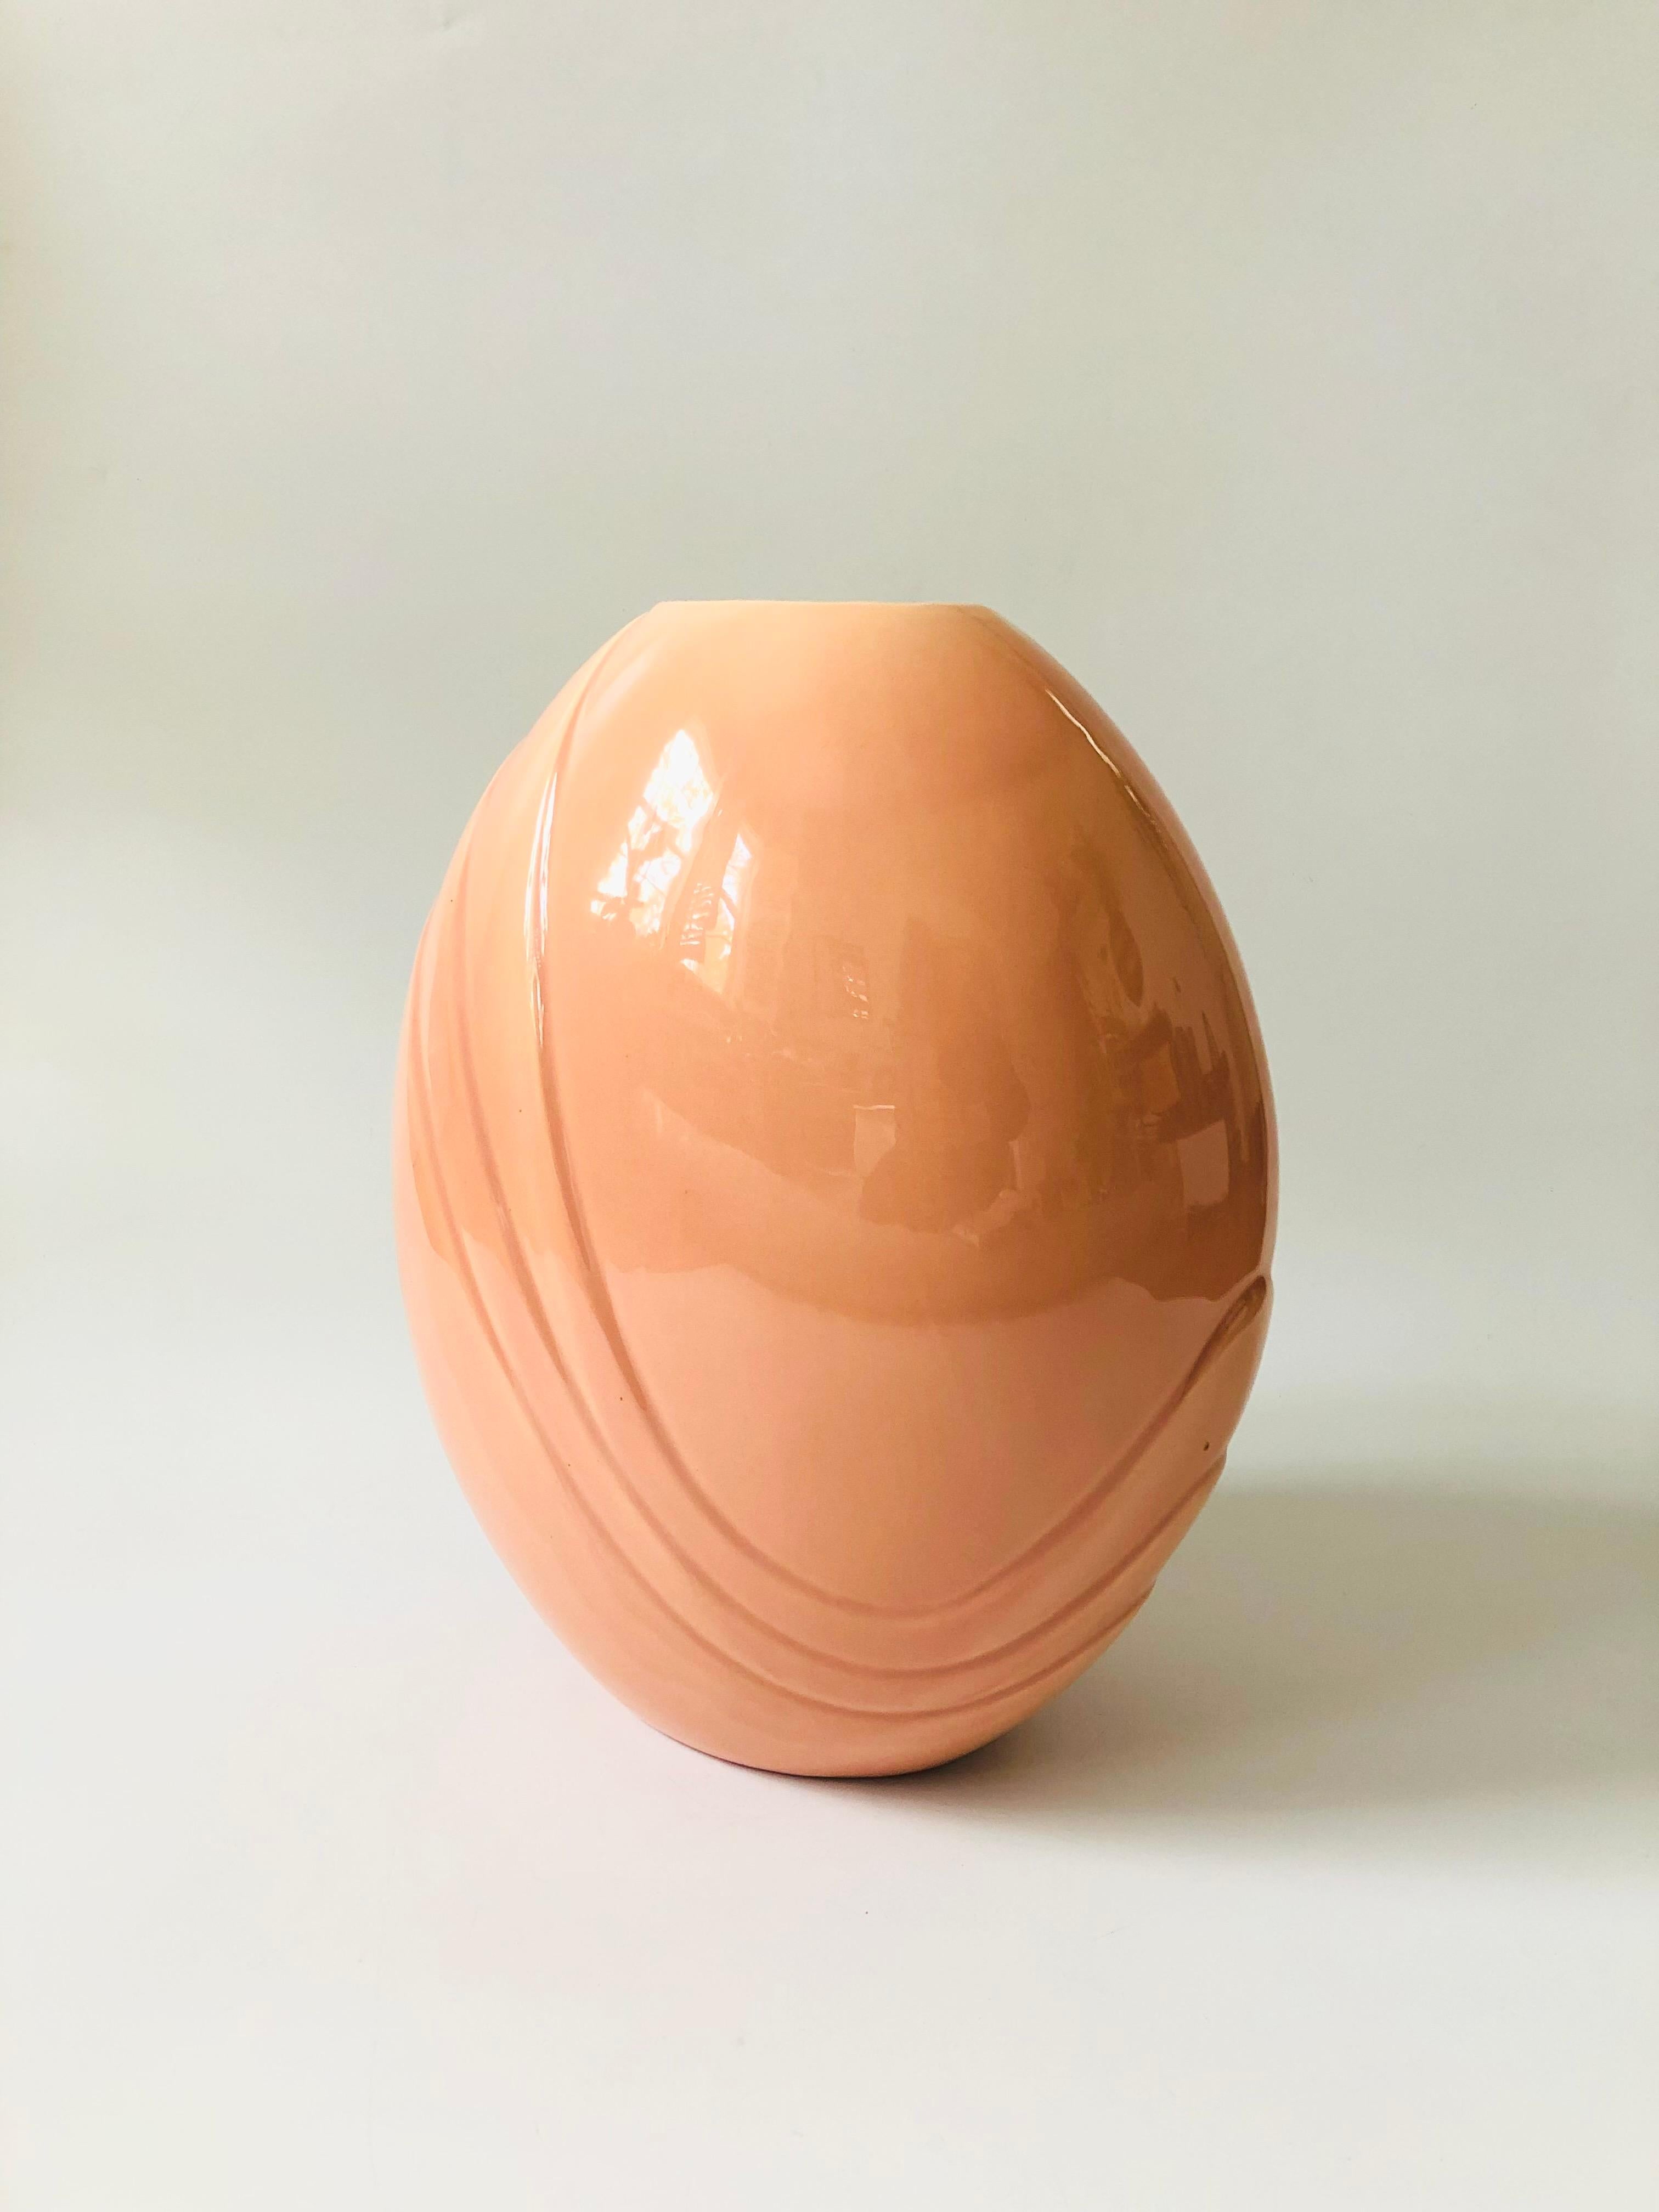 An extra large vintage 80s modern ceramic vase. Nice tapered oval shape with an embossed design on each side. Glossy pink glaze. A sculptural postmodern accent piece.
  